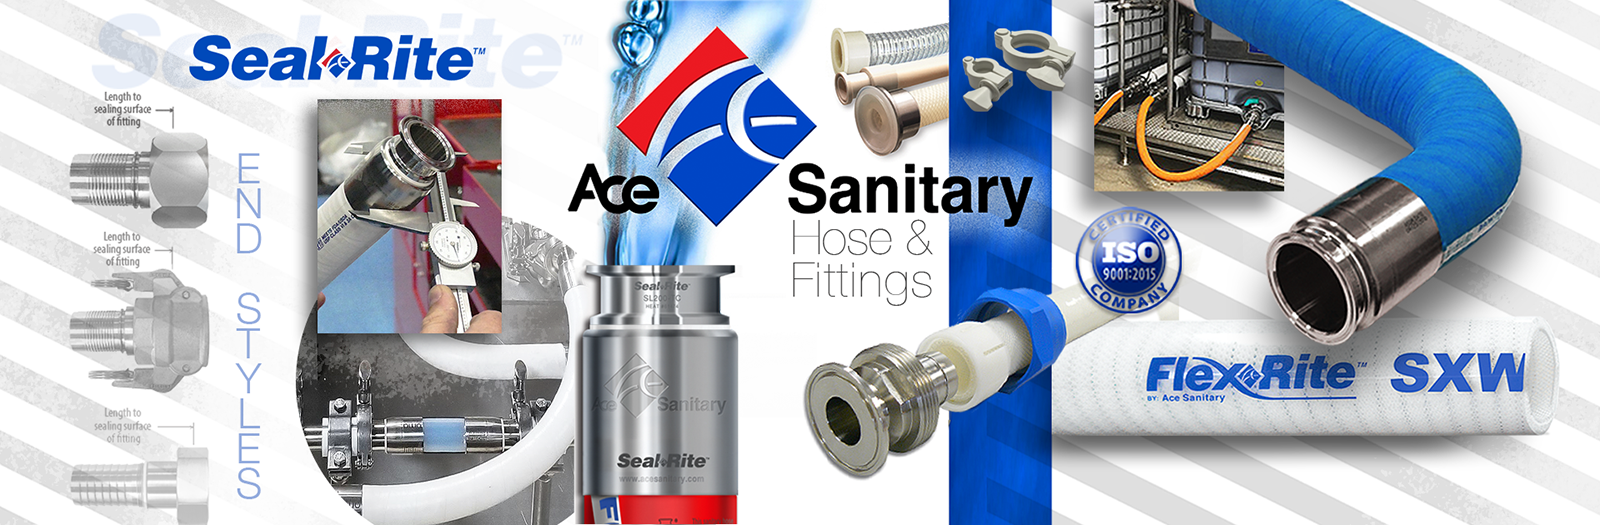 Ace Sanitary | Sanitary Hose - Fittings - Accessories - Equipment